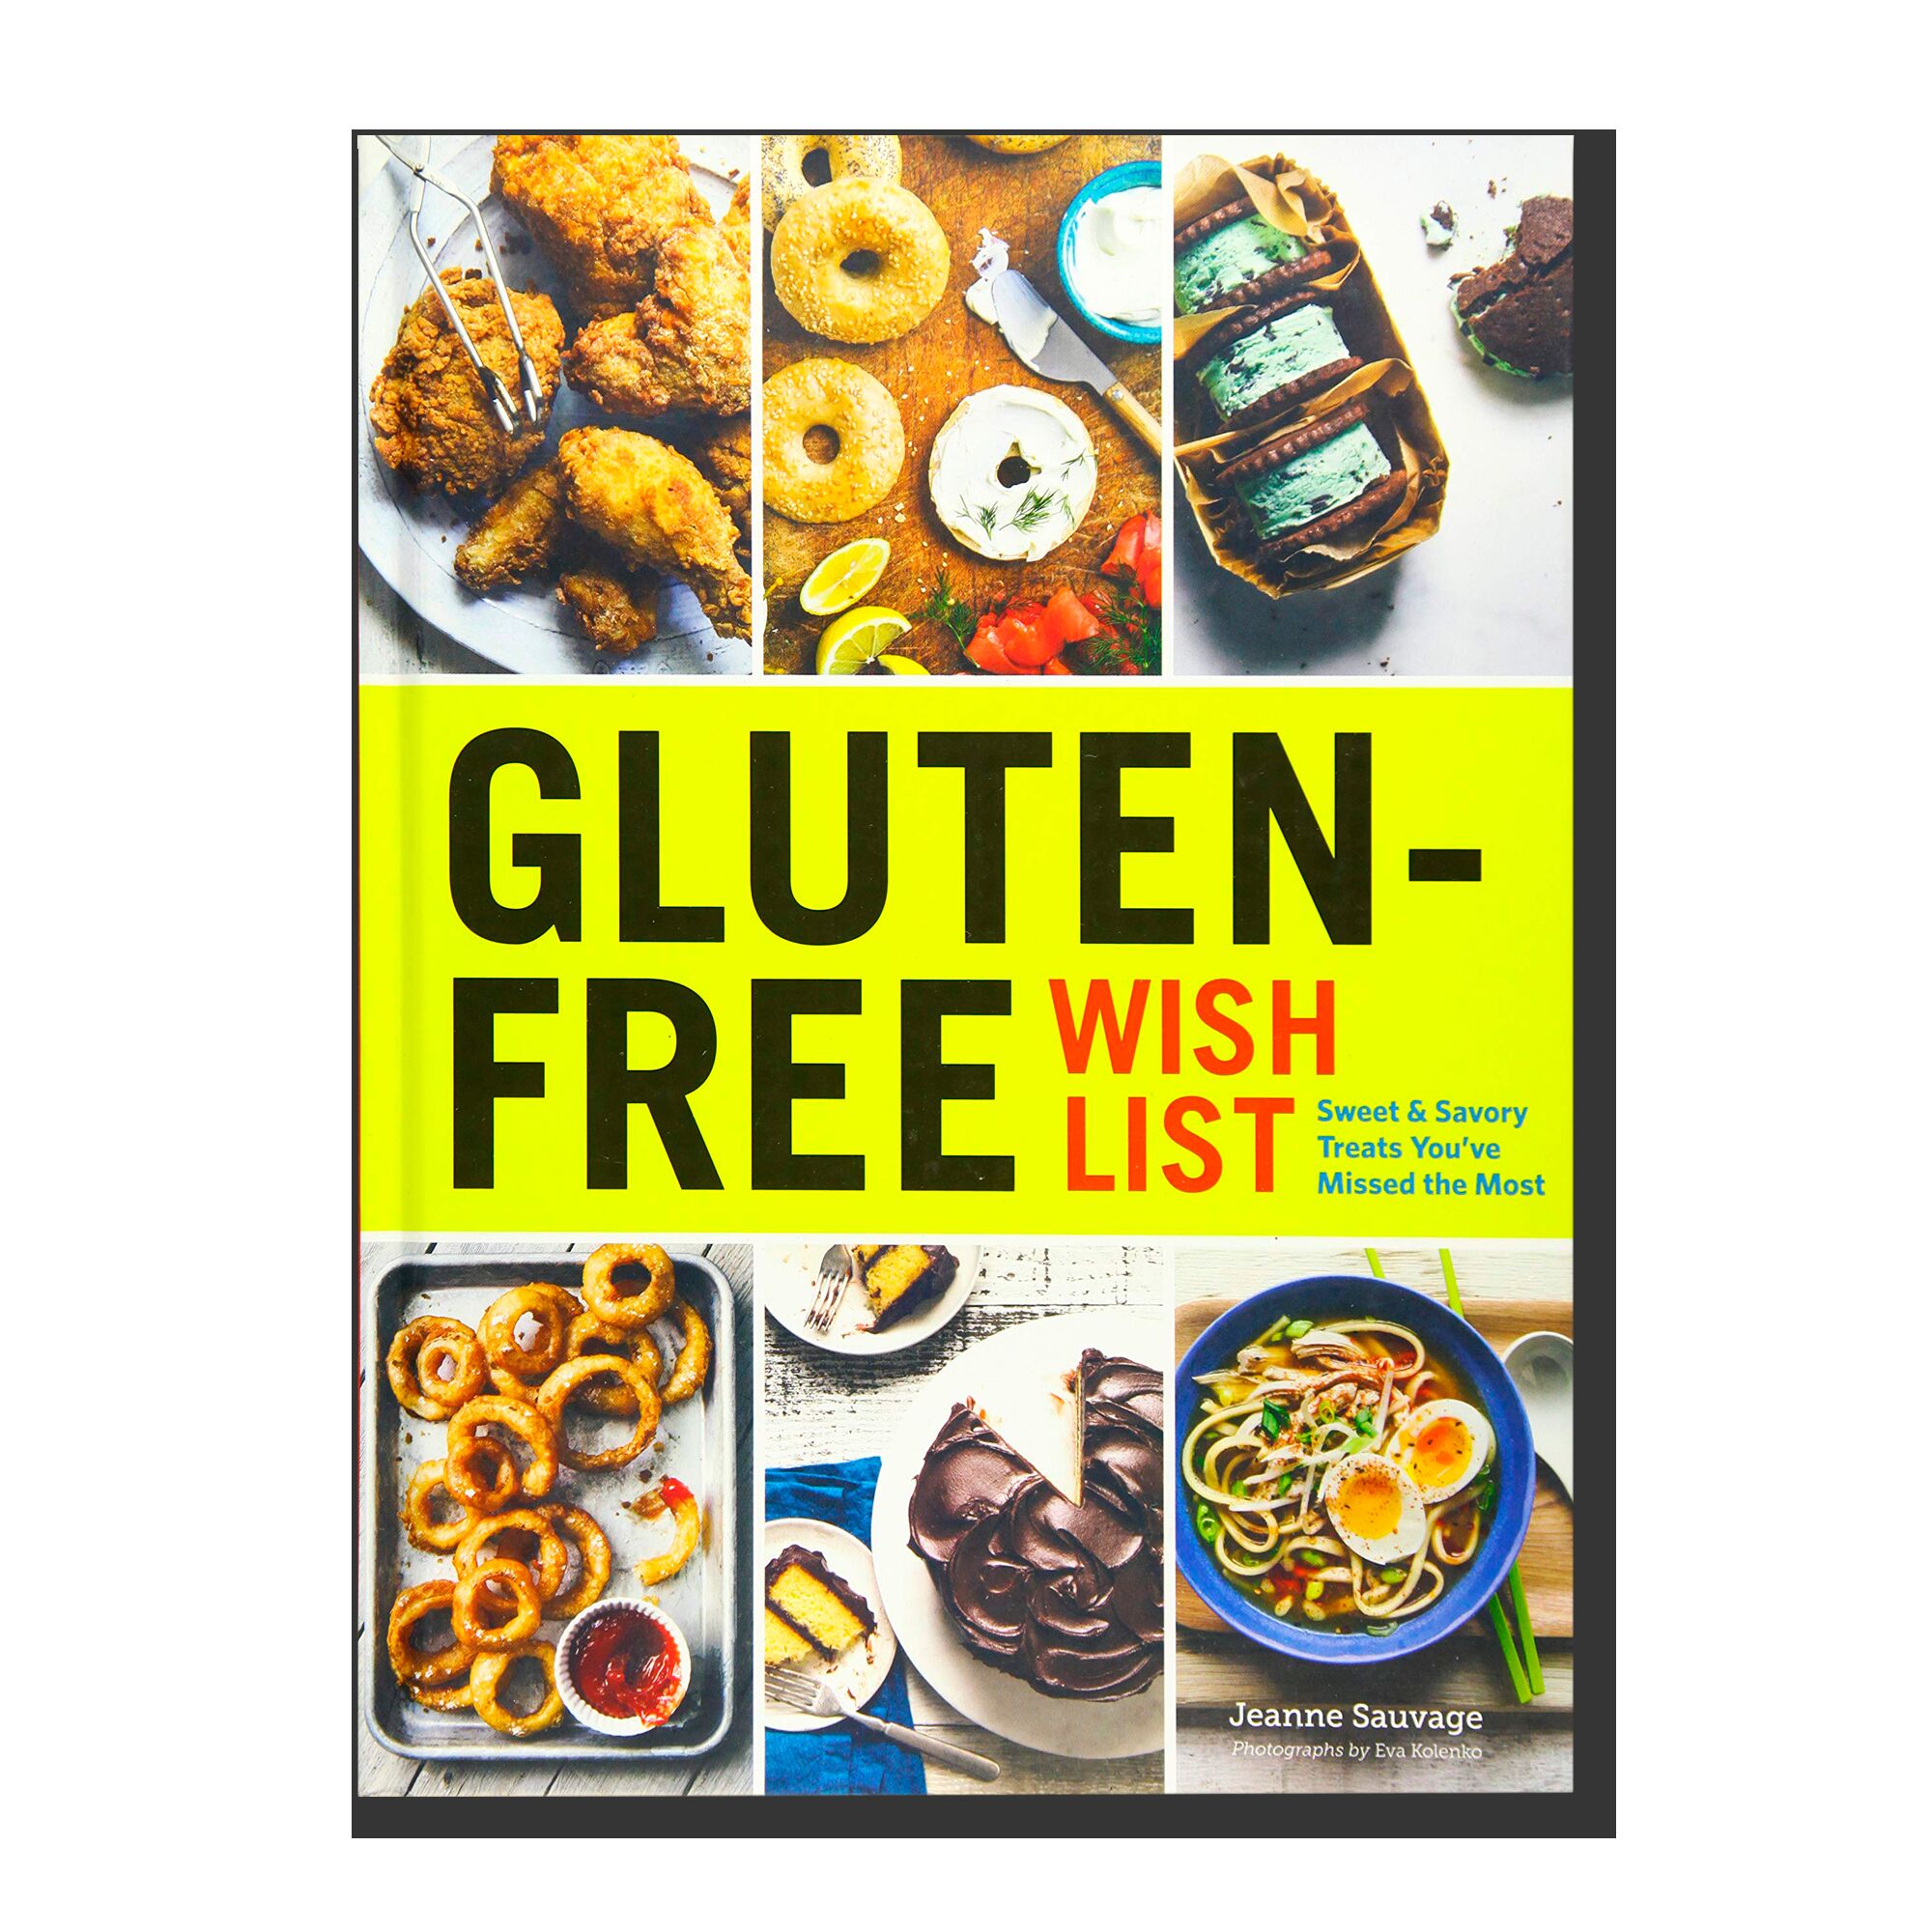 Gluten-Free Wish List: Sweet and Savory Treats You've Missed the Most